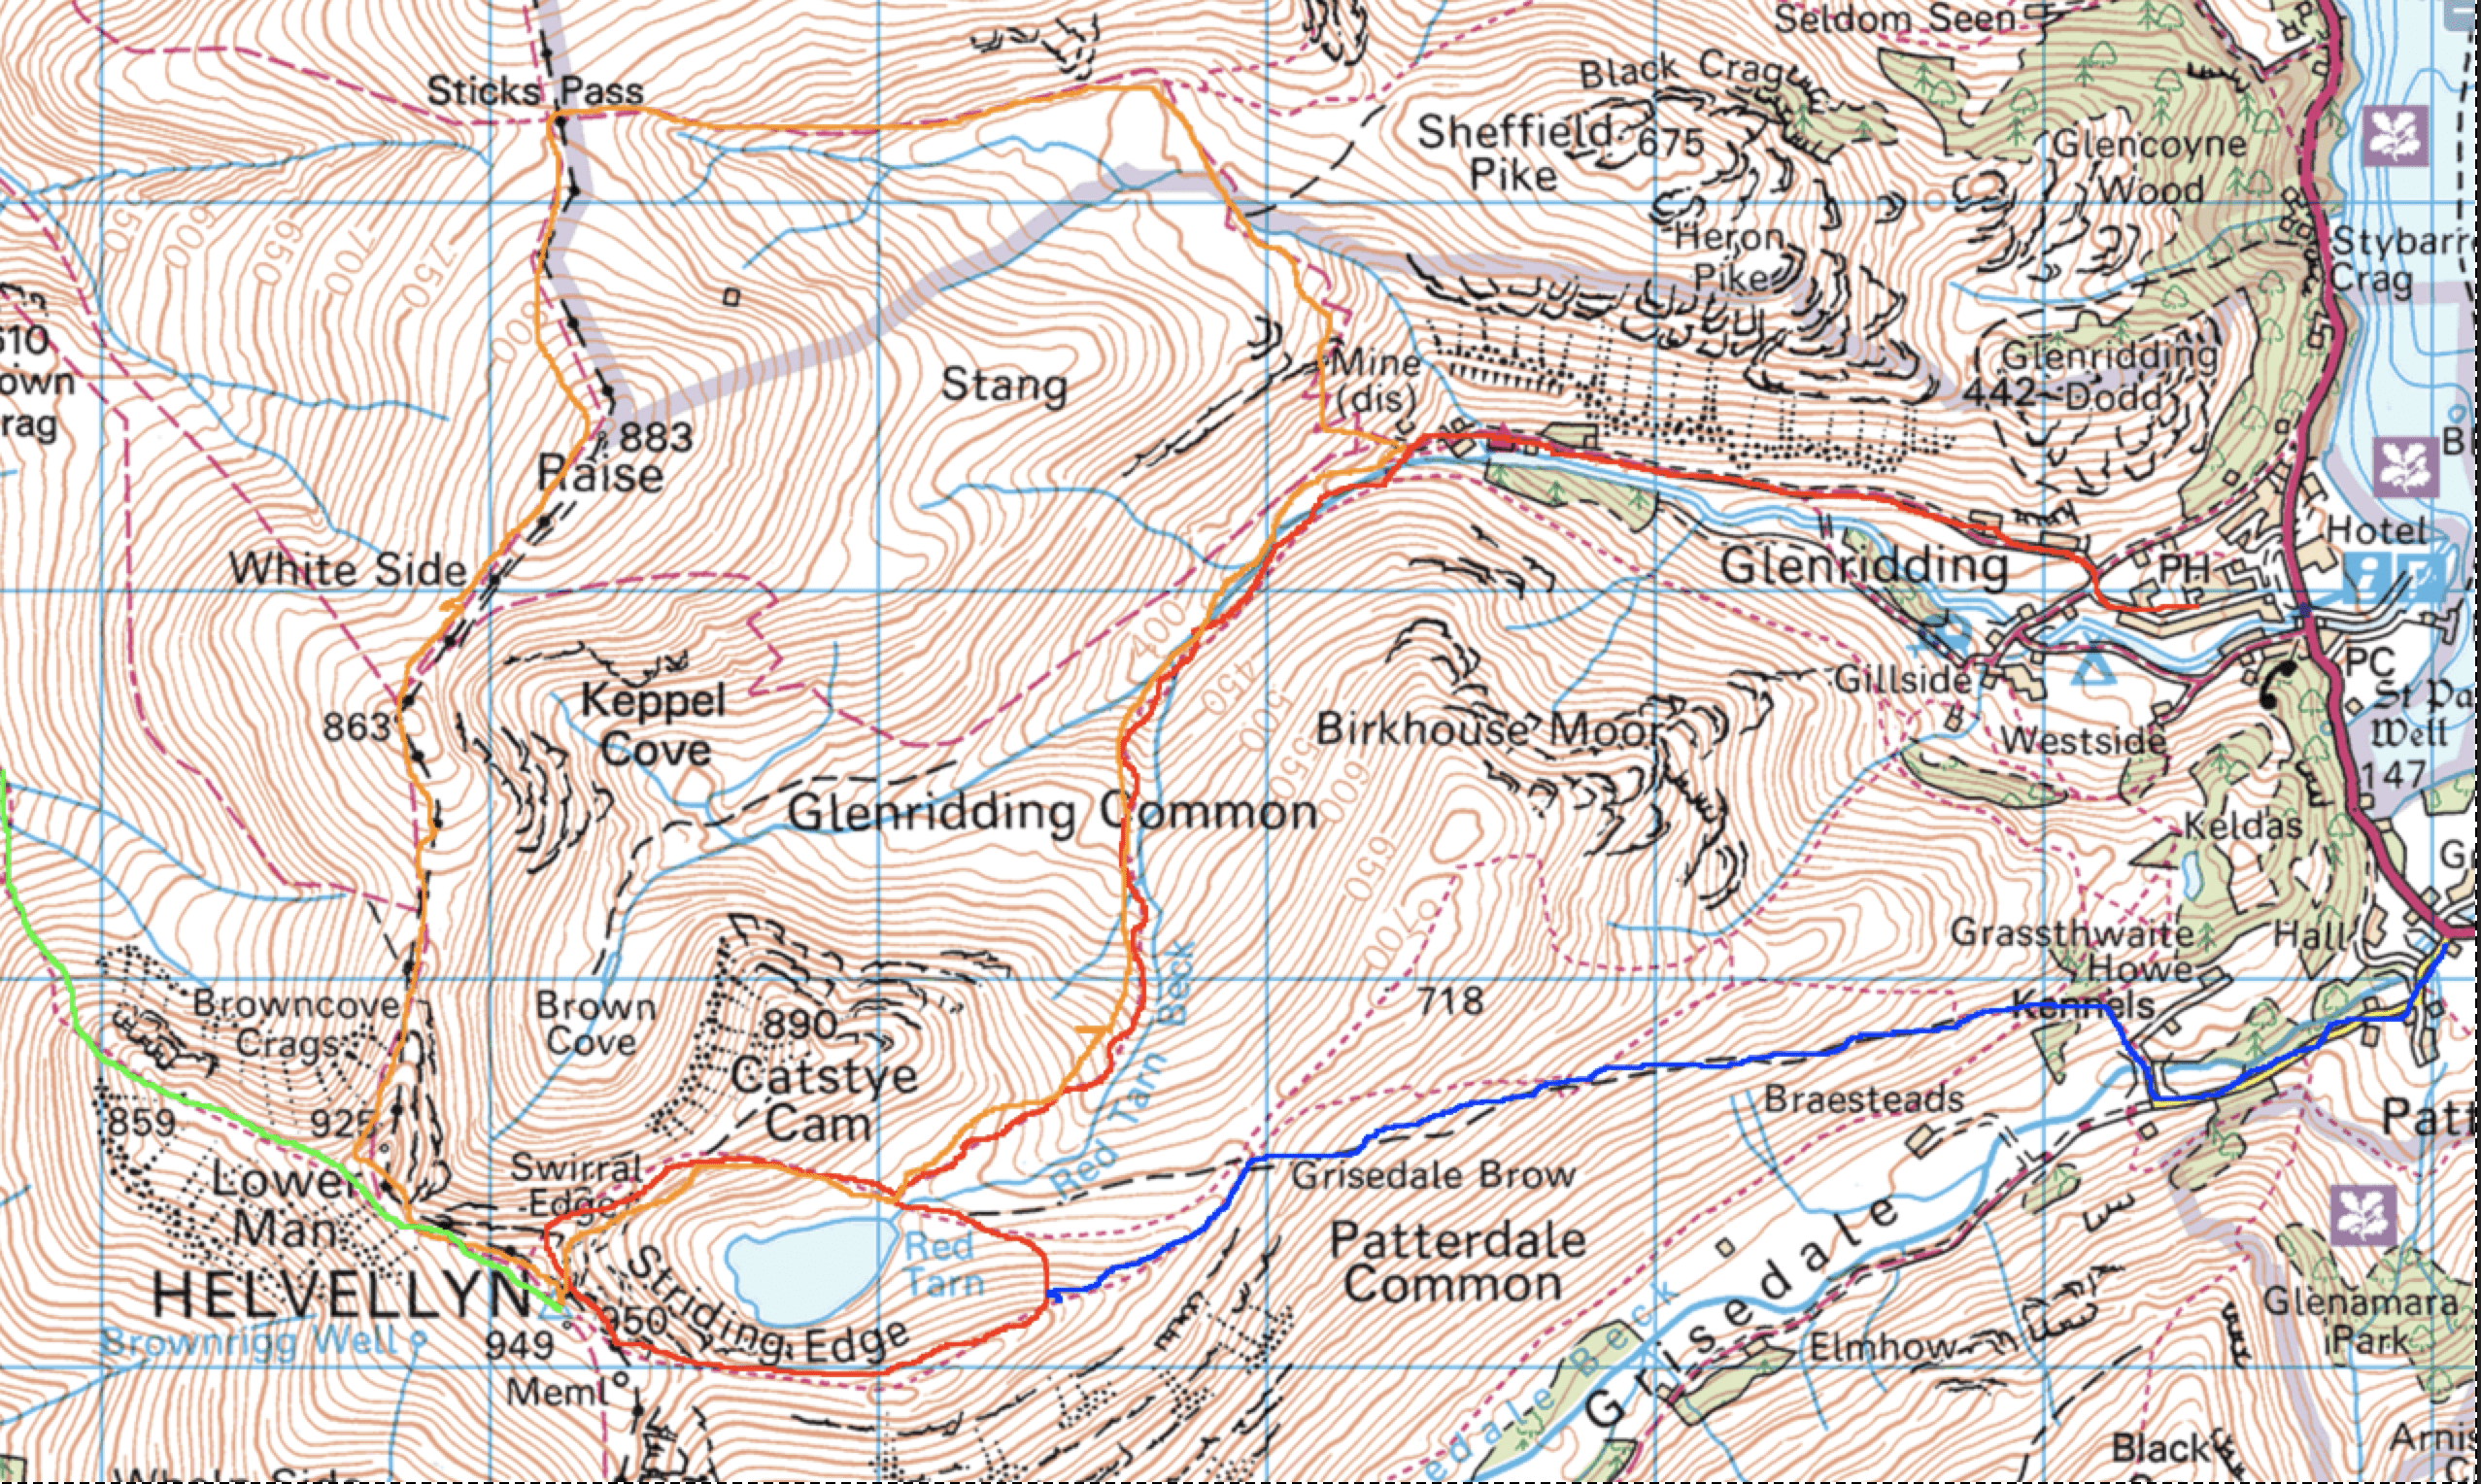 picture of ordnance survey map helvellyn - striding edge - swirral edge - walking routes